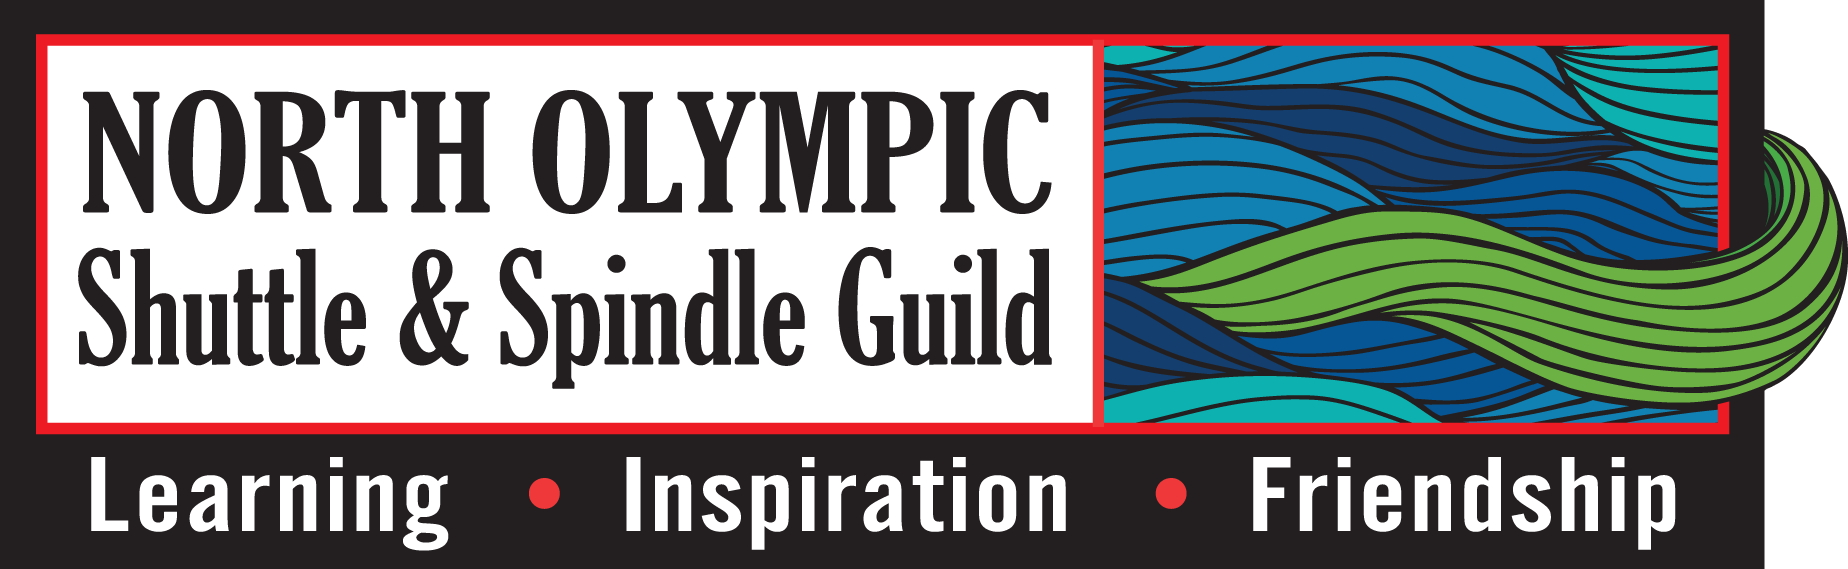 North Olympic Shuttle & Spindle Guild